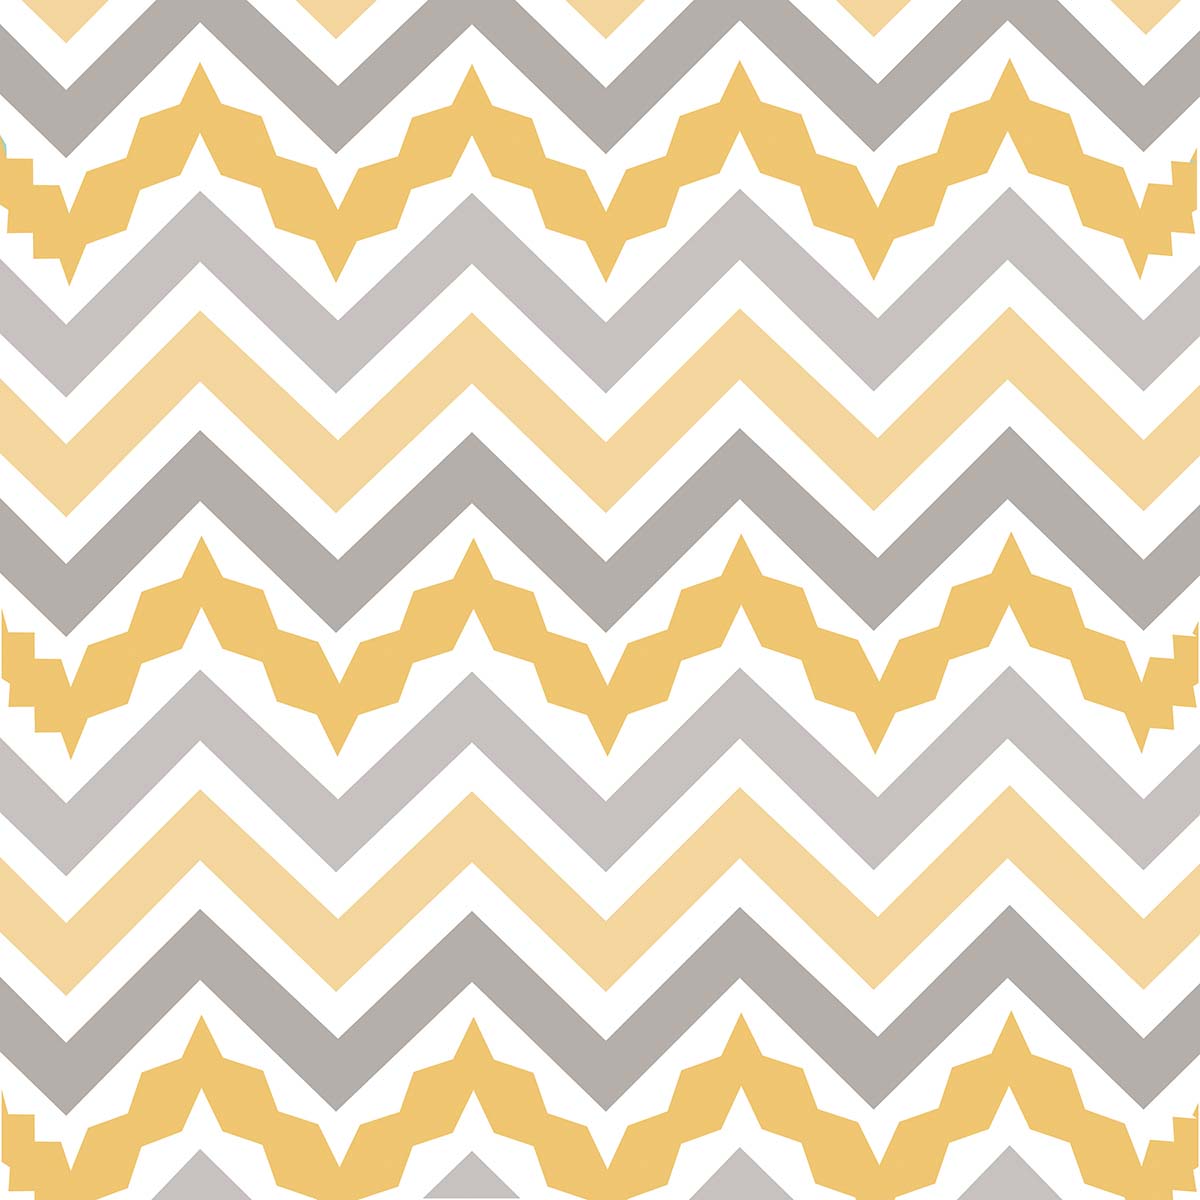 A pattern of yellow and grey zigzag lines